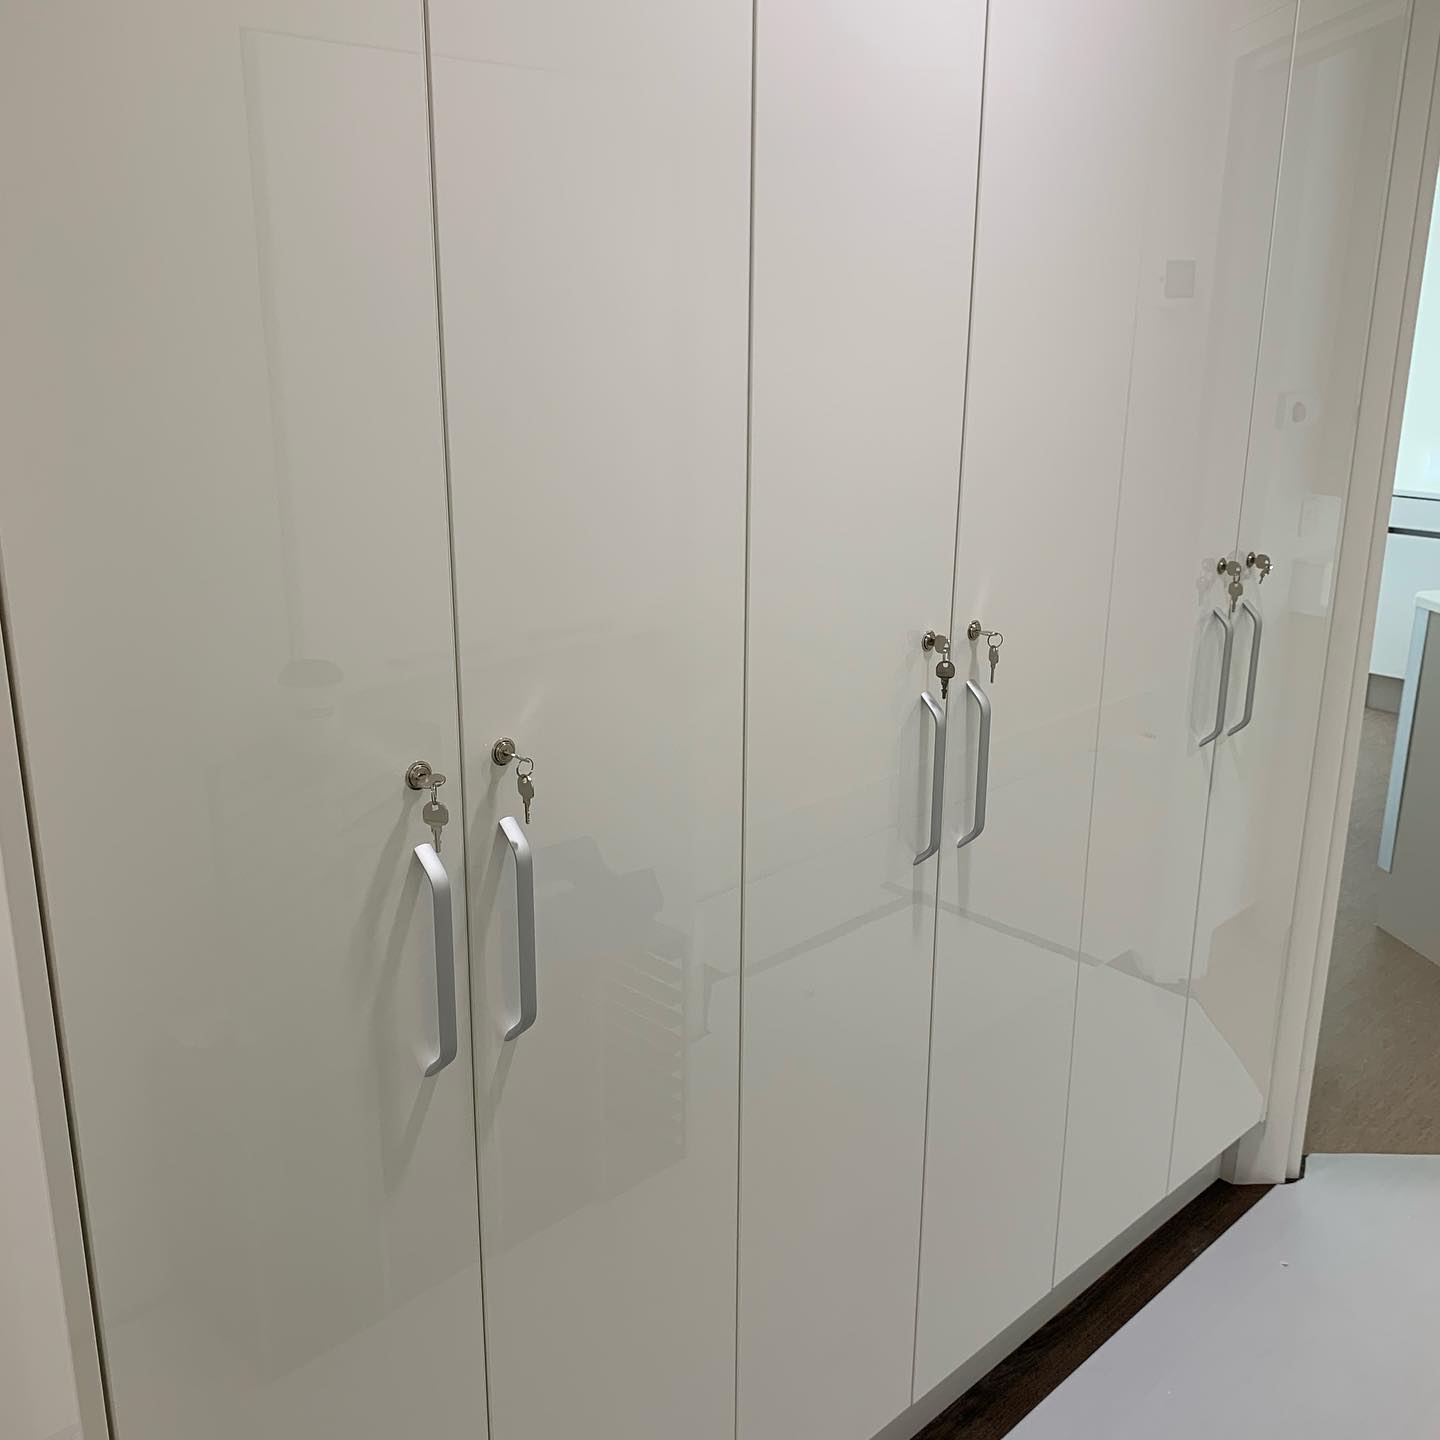 Dispensing Cabinets finished with White Luxe board